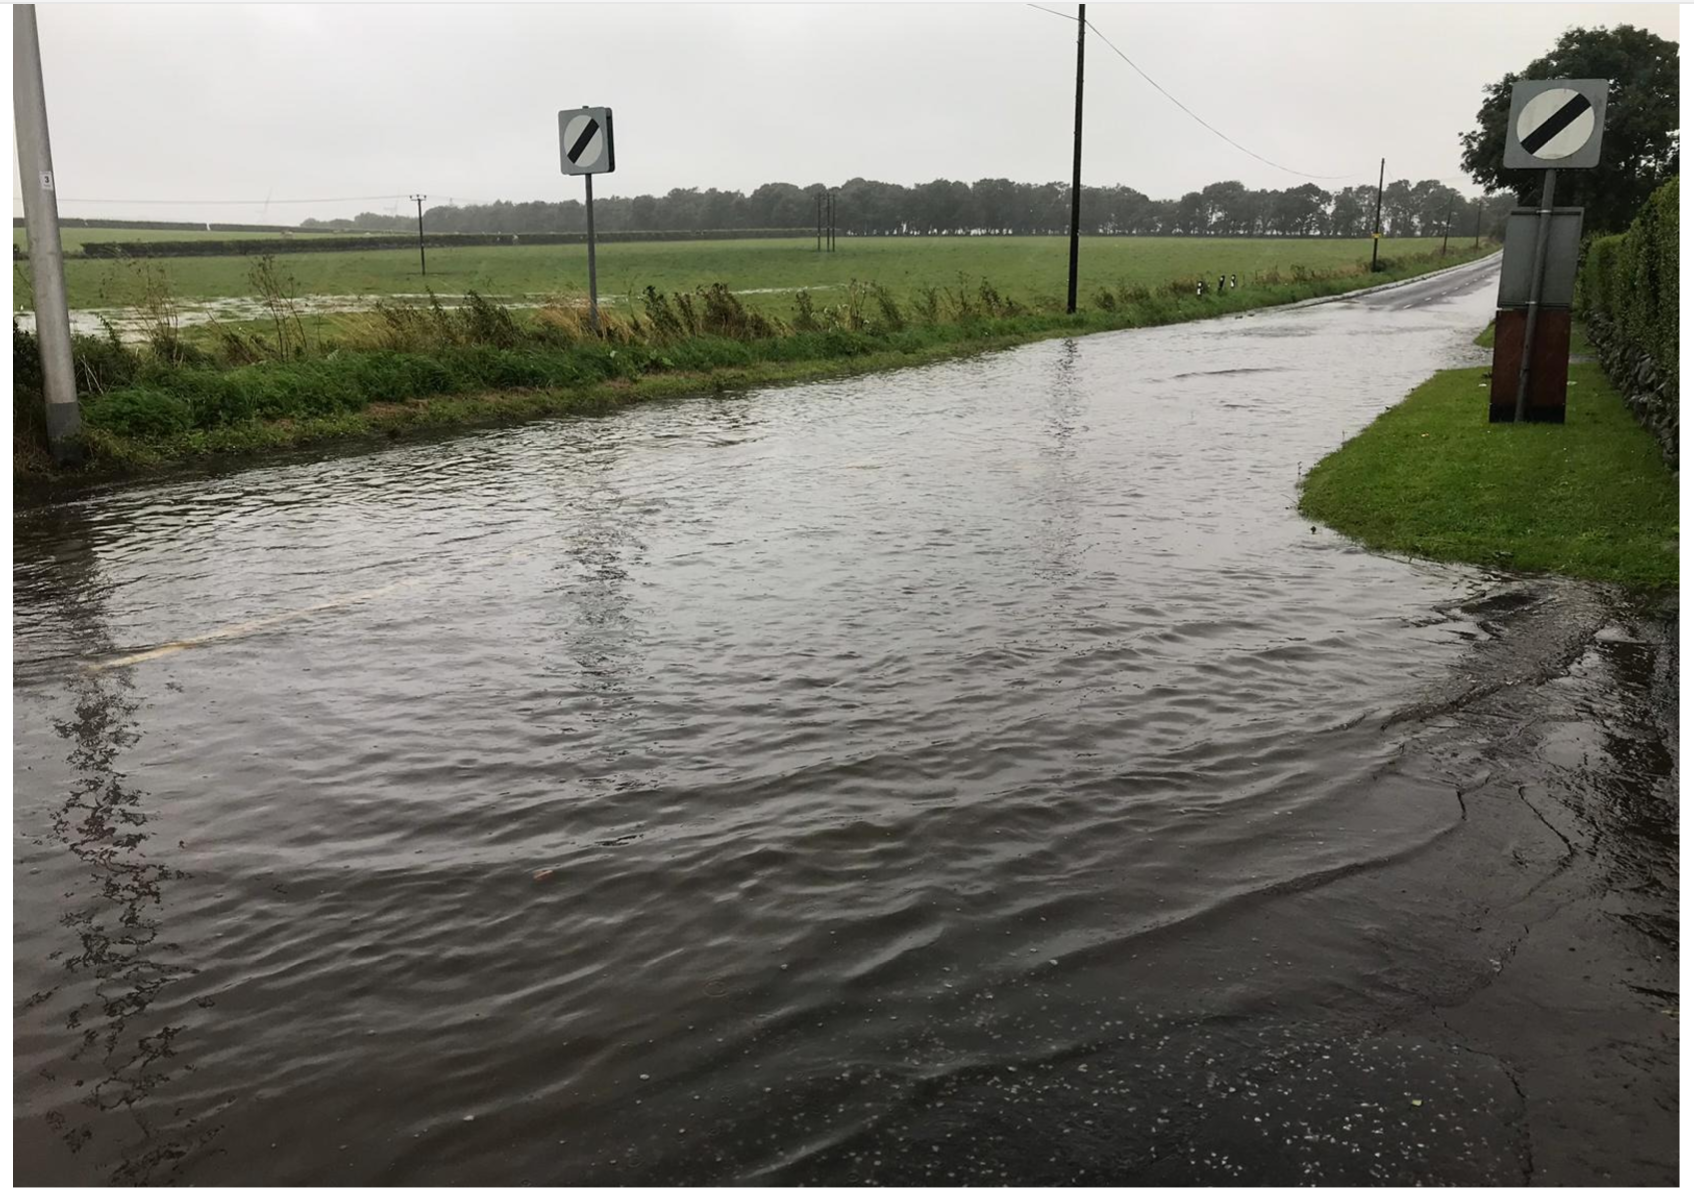 A picture of the road beside the site following recent rainfall.